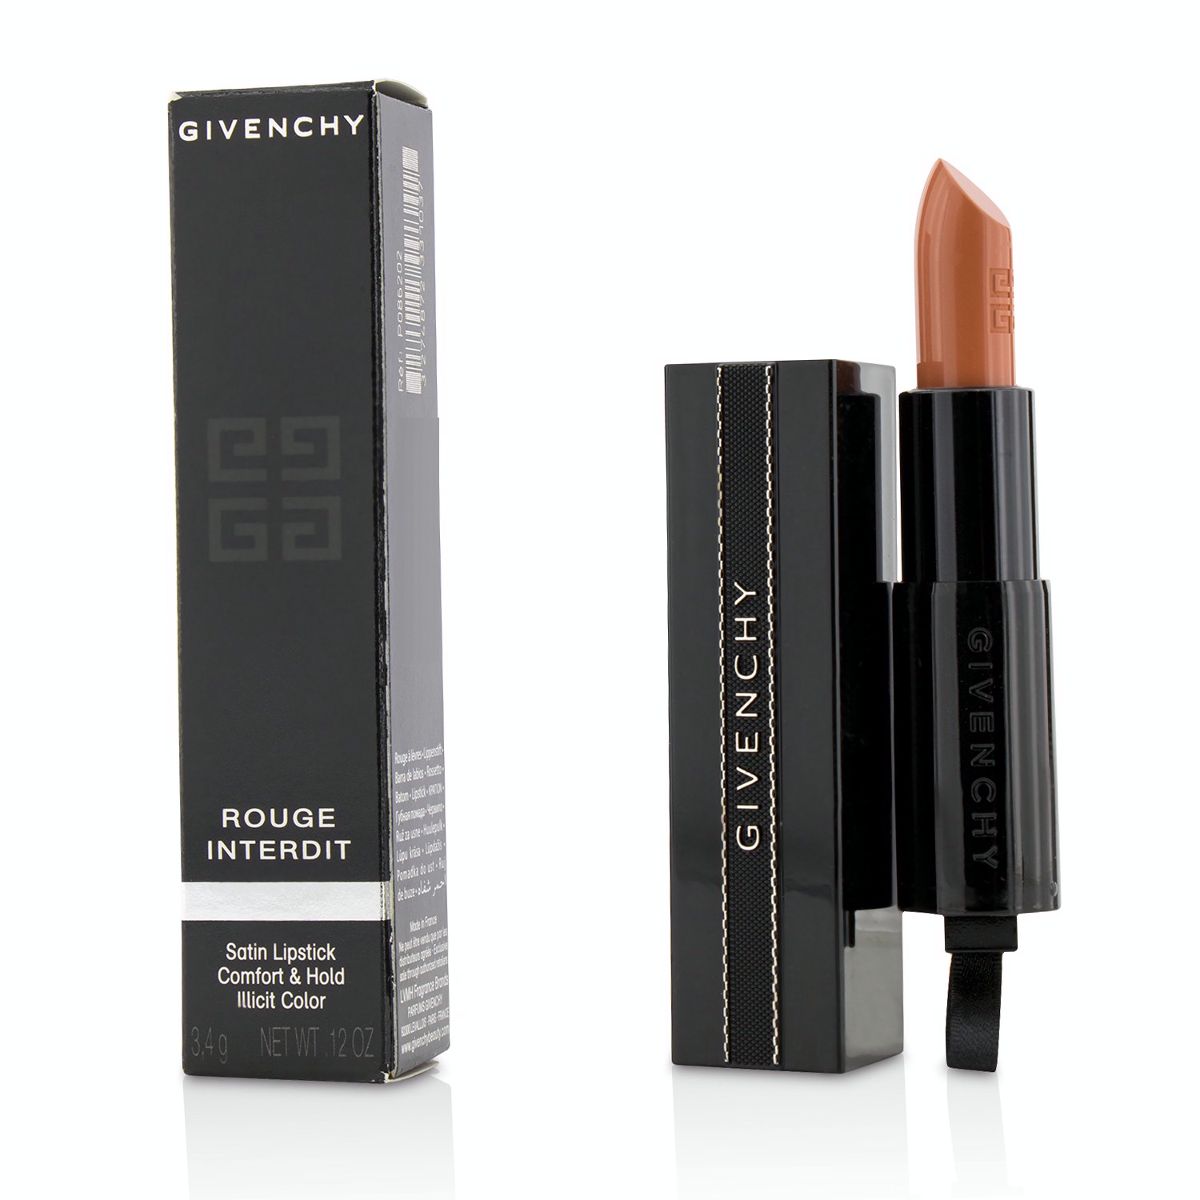 Rouge Interdit Satin Lipstick - # 2 Serial Nude Givenchy Image